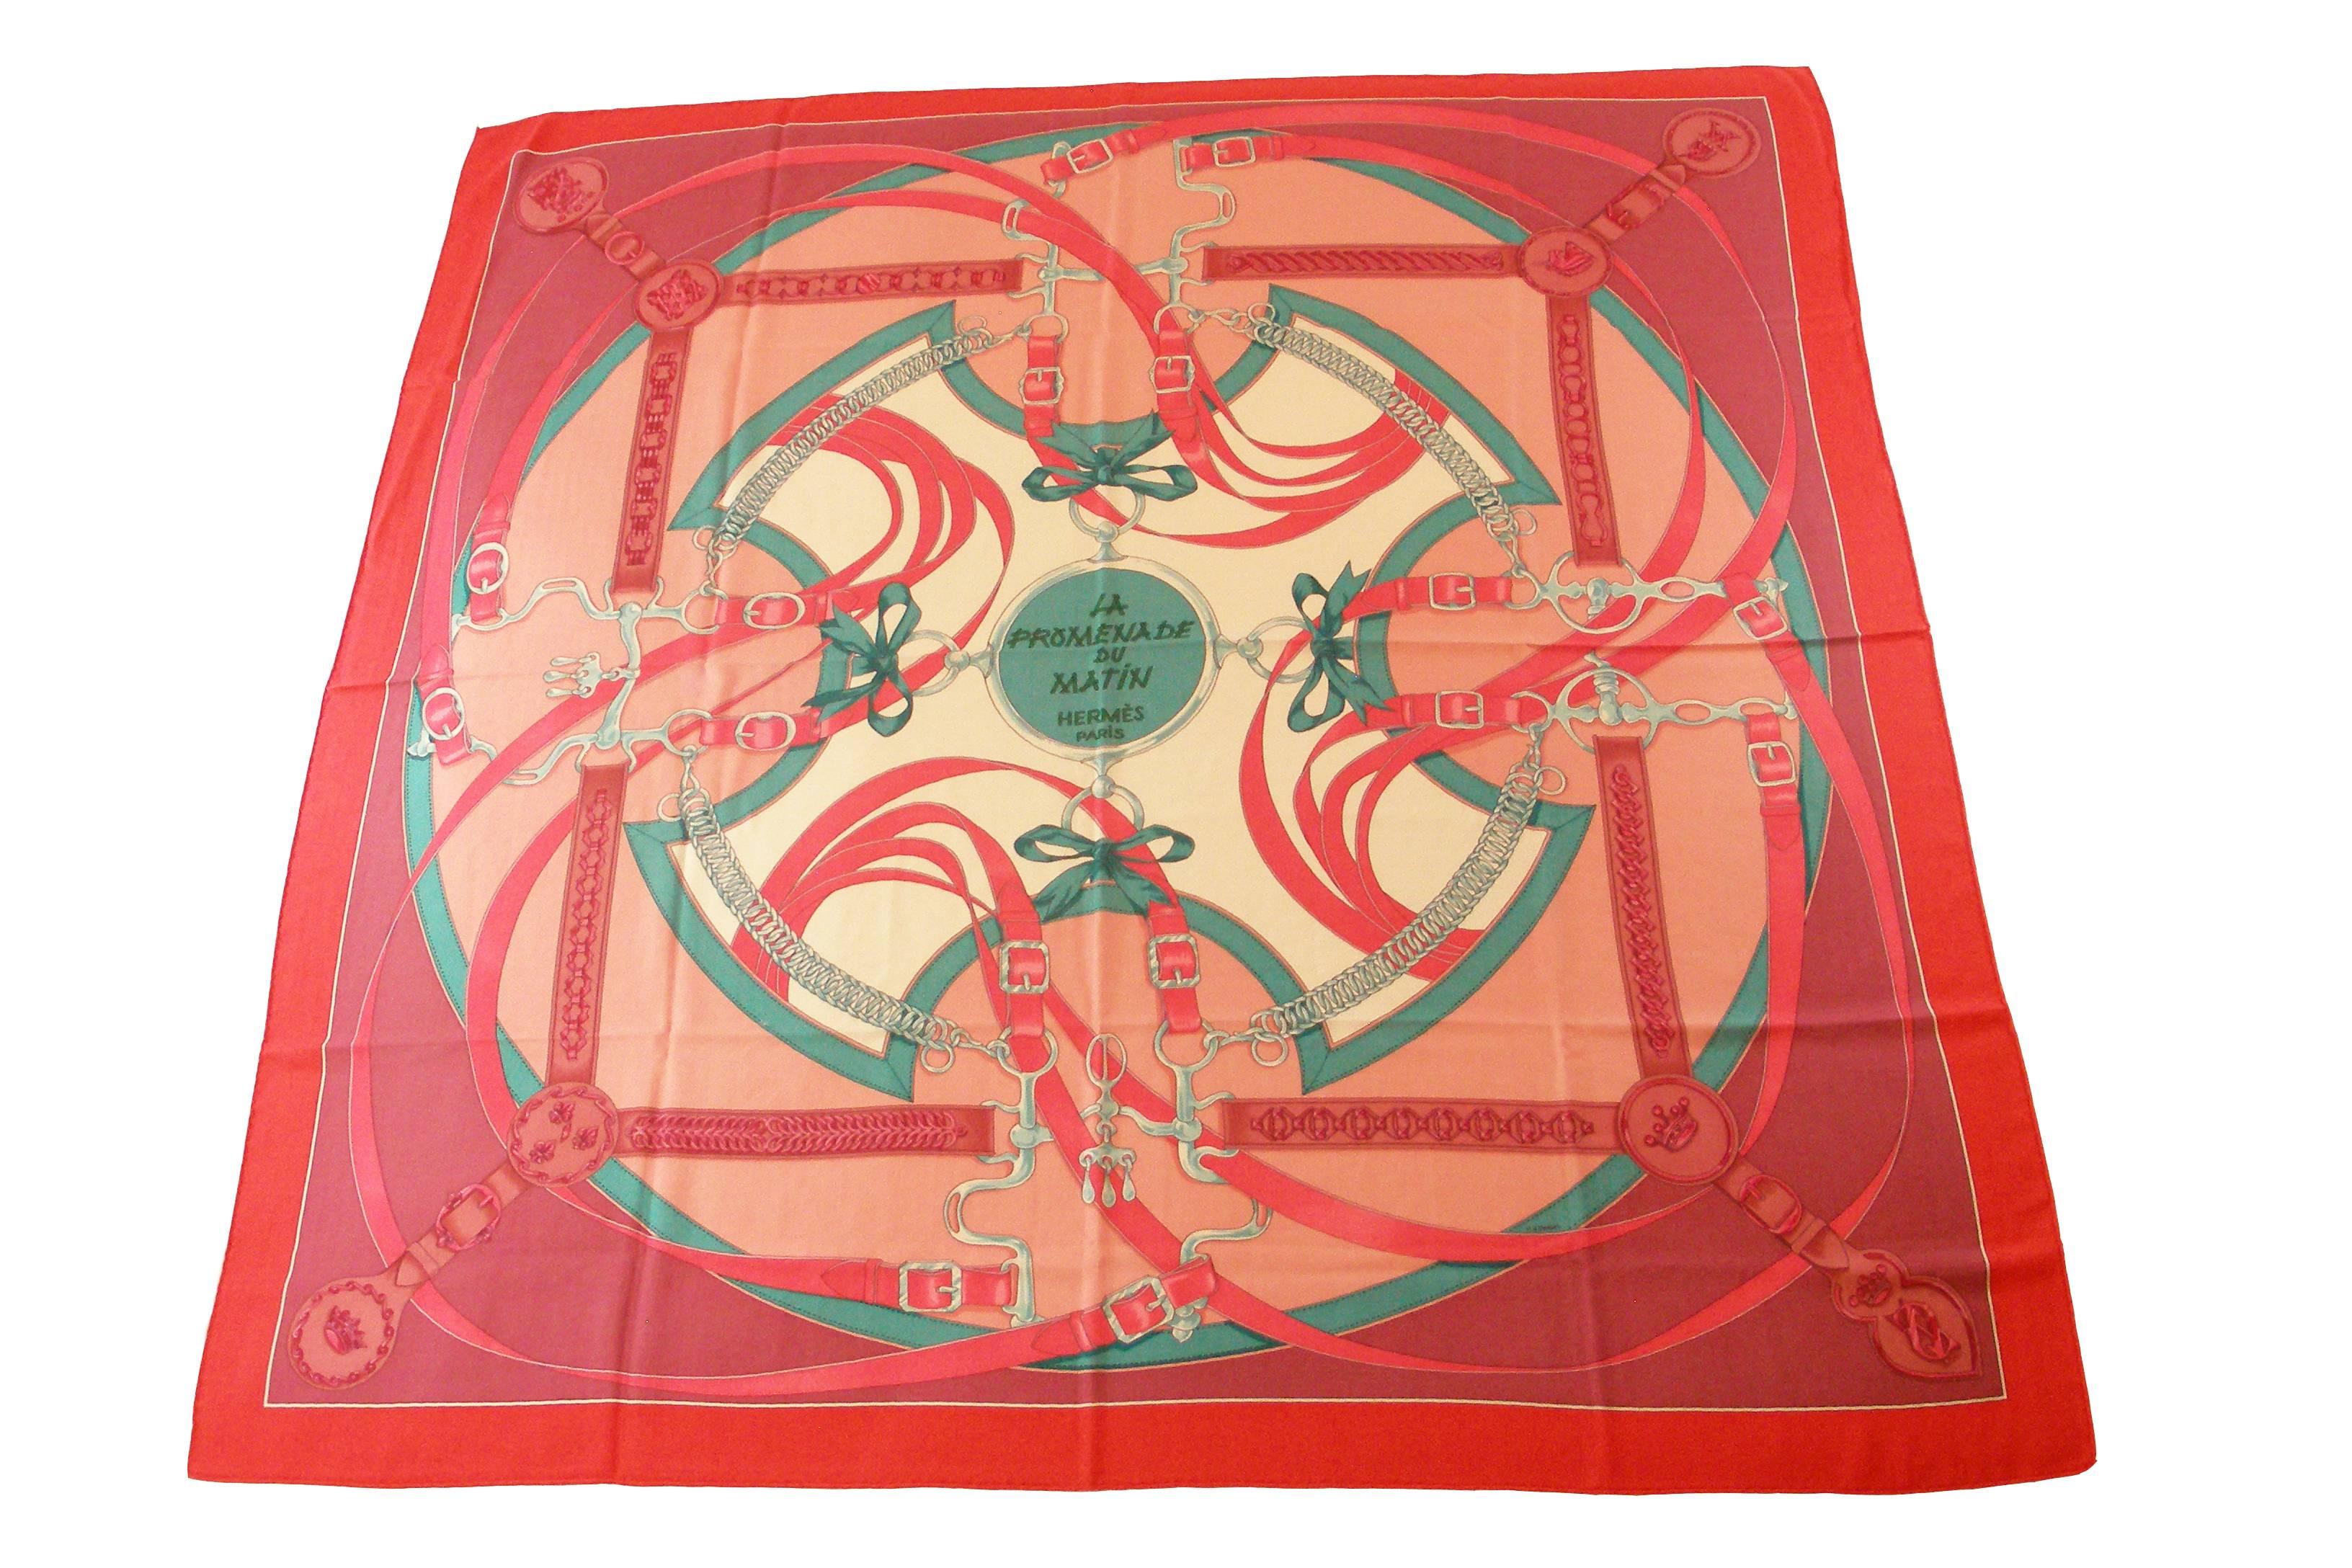 Hermès La Promenade du Matin Shawl
Designed by Henri D'Origny
Size 140 cm x 140 cm 
Color : corail - menthol - vieux rose
Note : A small mark of ink
Please look at the last photo .
Sorry no Box , it's comes with Hermès shopping bag and ribbon